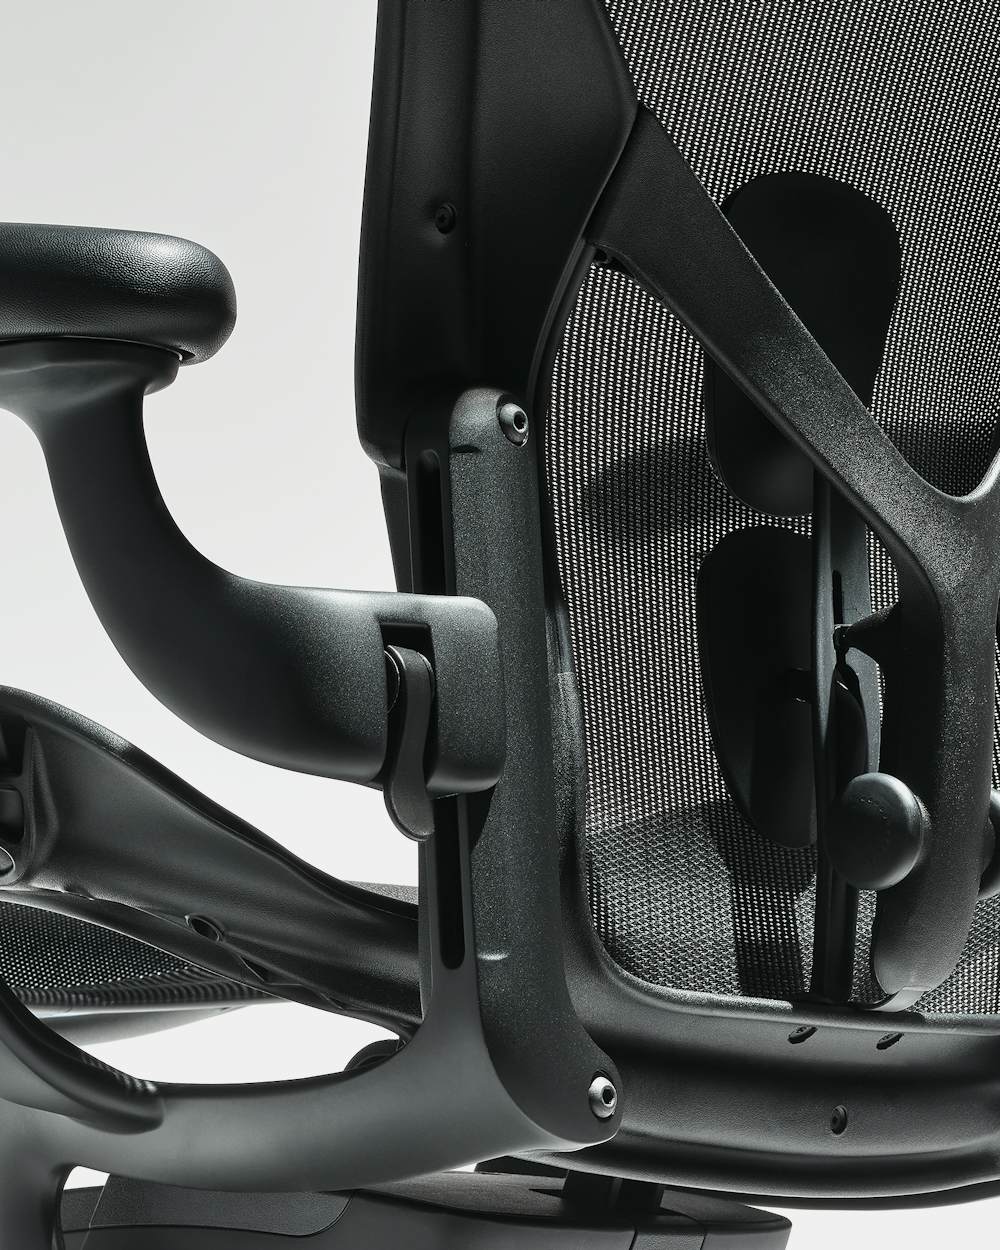 Detail view of Aeron chair in Onyx